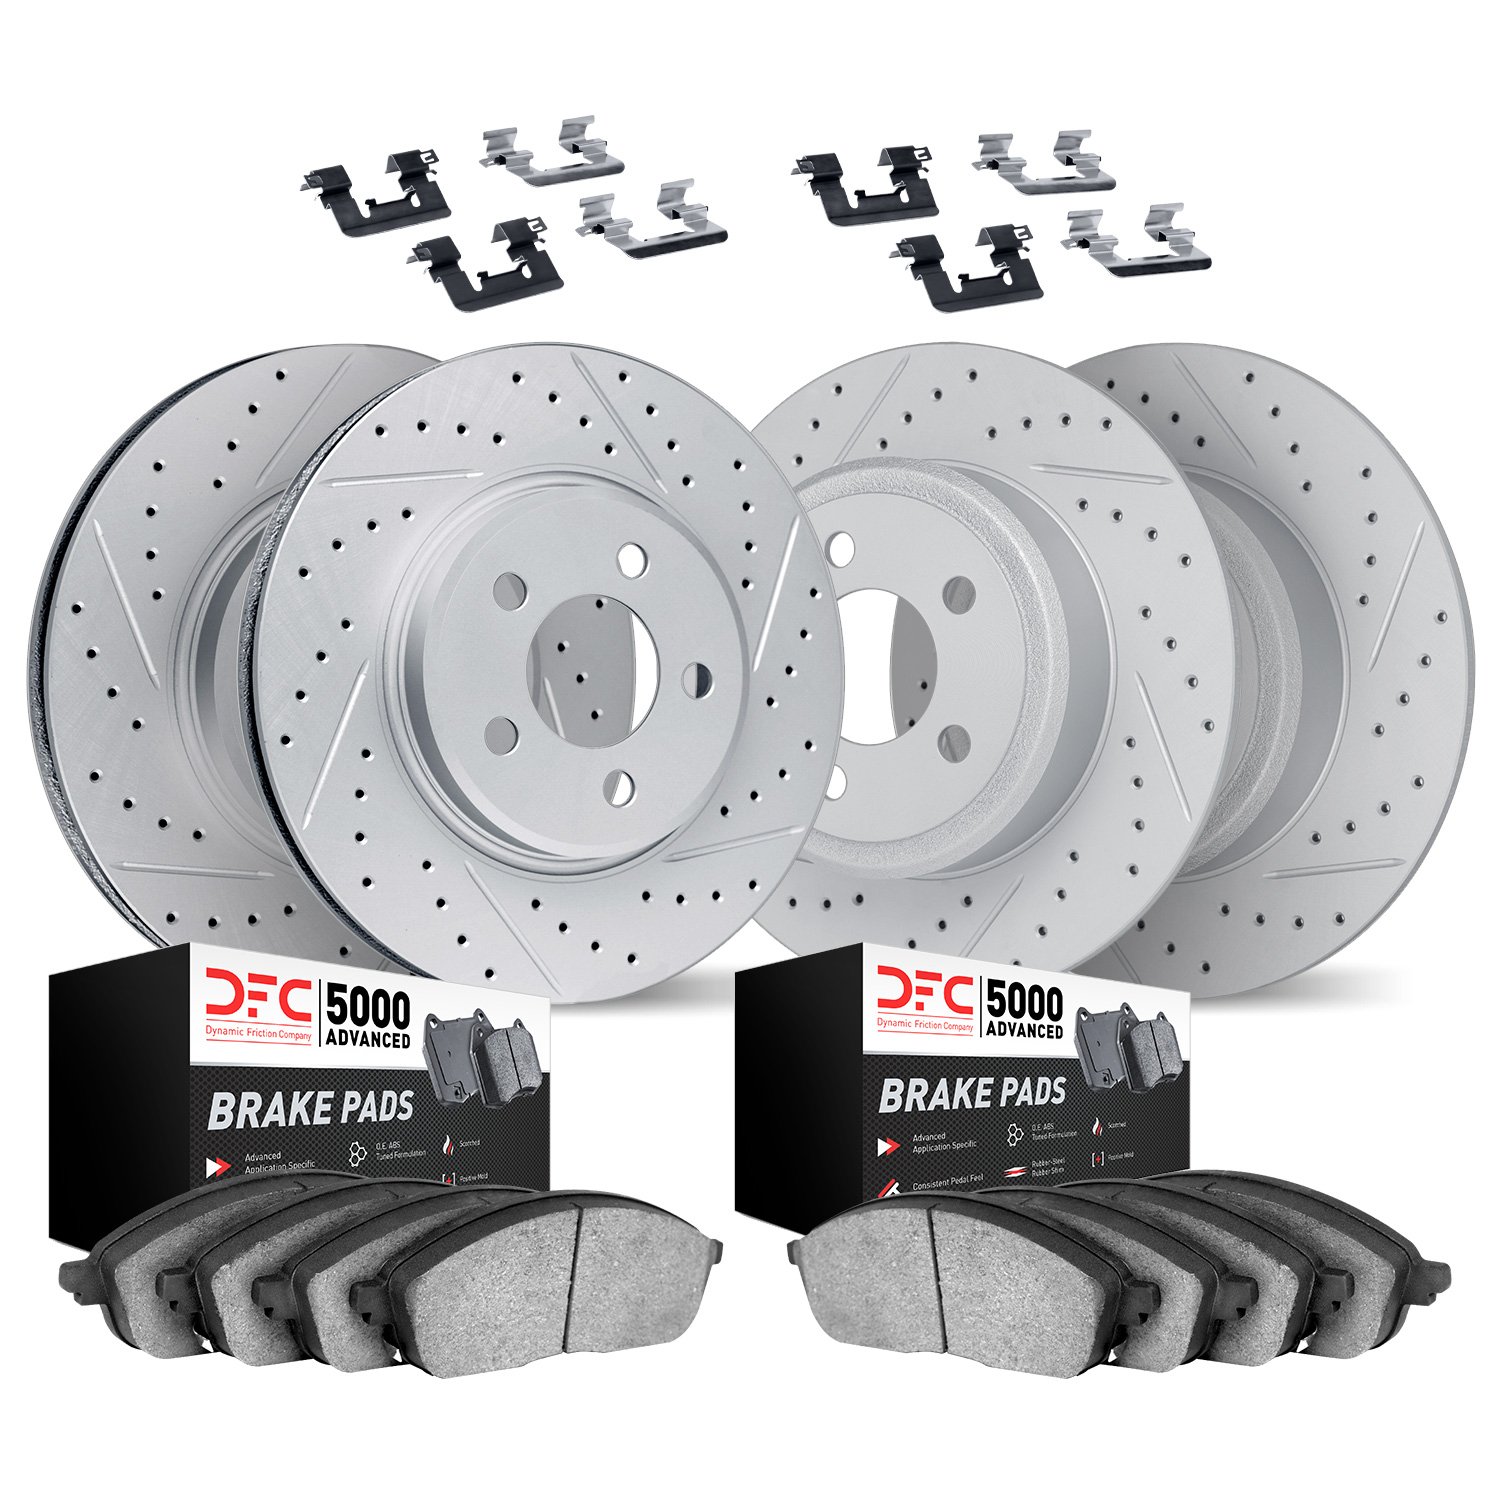 2514-13003 Geoperformance Drilled/Slotted Rotors w/5000 Advanced Brake Pads Kit & Hardware, 2012-2016 Subaru, Position: Front an